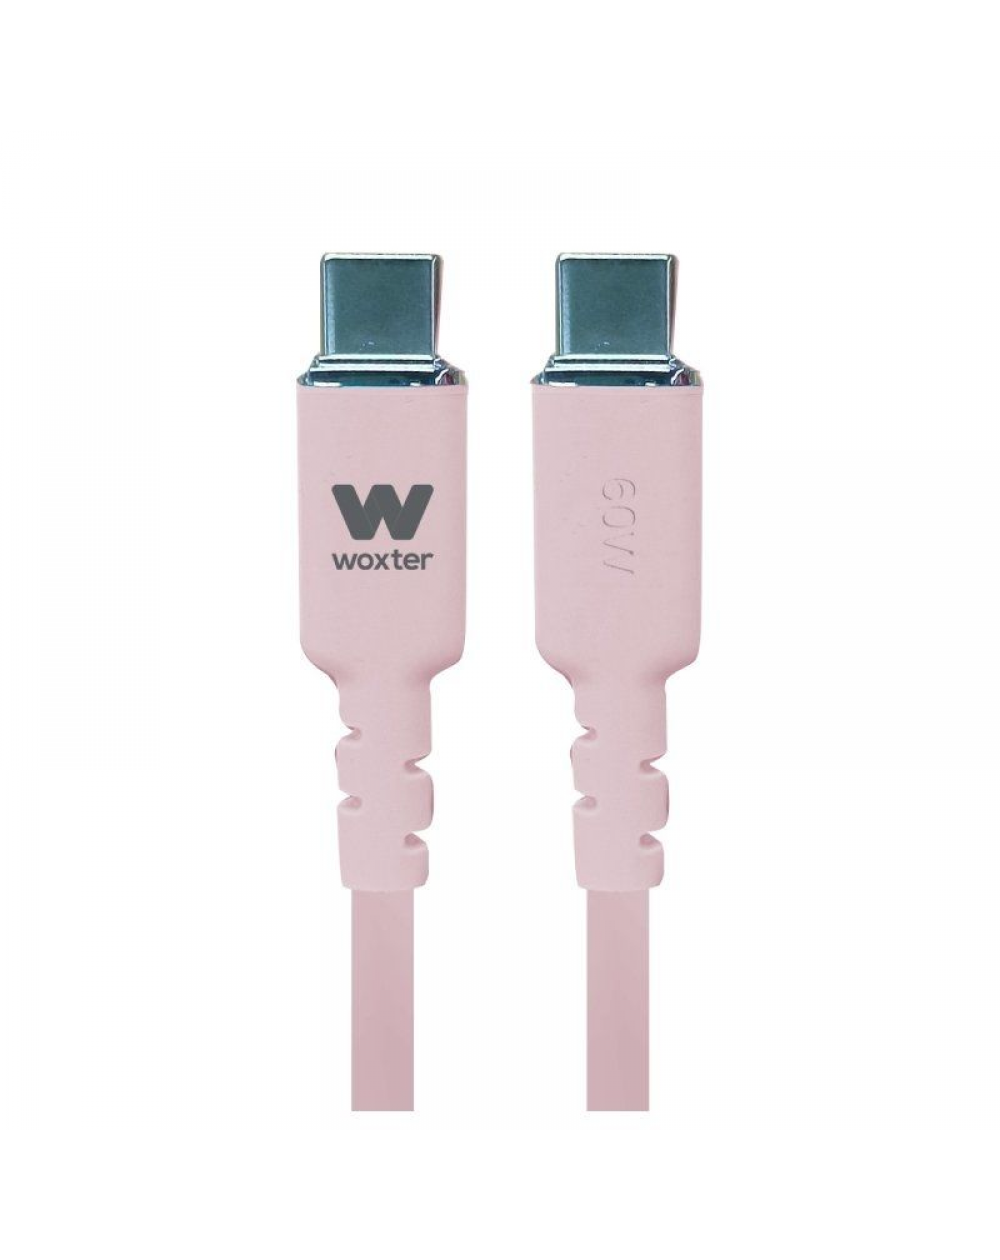 Cable USB 2.0 Tipo-C Woxter PE26-187/ USB Tipo-C Macho - USB Tipo-C Macho/ Hasta 60W/ 480Mbps/ 1.2m/ Rosa